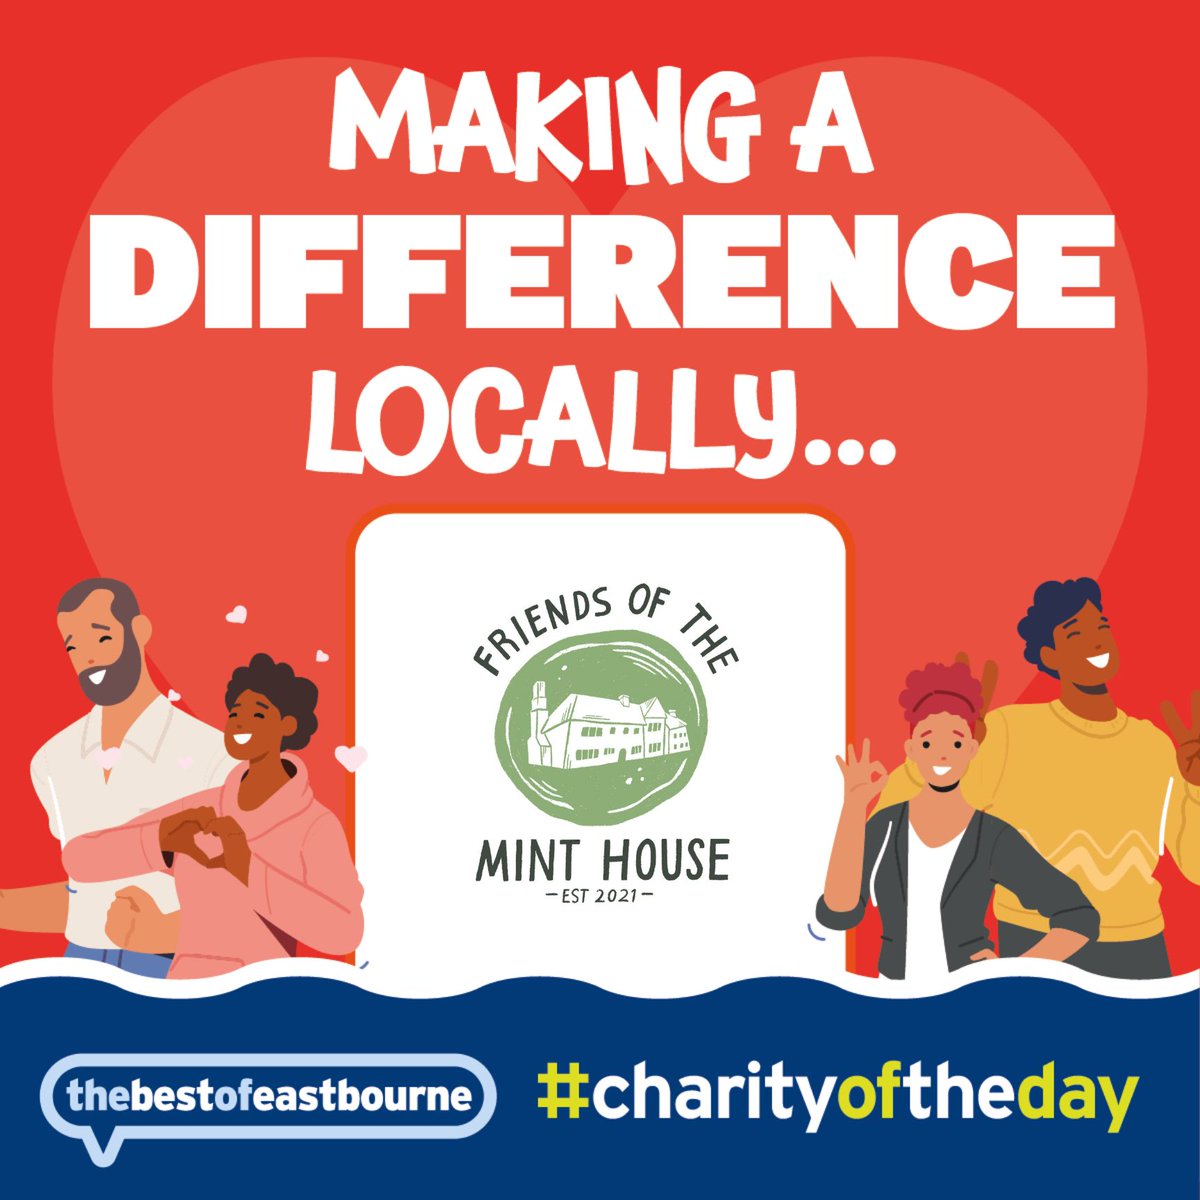 🤝 Making a difference locally 💙 Please show your support for Friends of Mint House, you can find out more about this local charity in our Community Guide bit.ly/3uwl2hZ #BestOfEastbourne #CharityOfTheDay #EastbourneCharity #EBcharity #EastbourneVolunteer